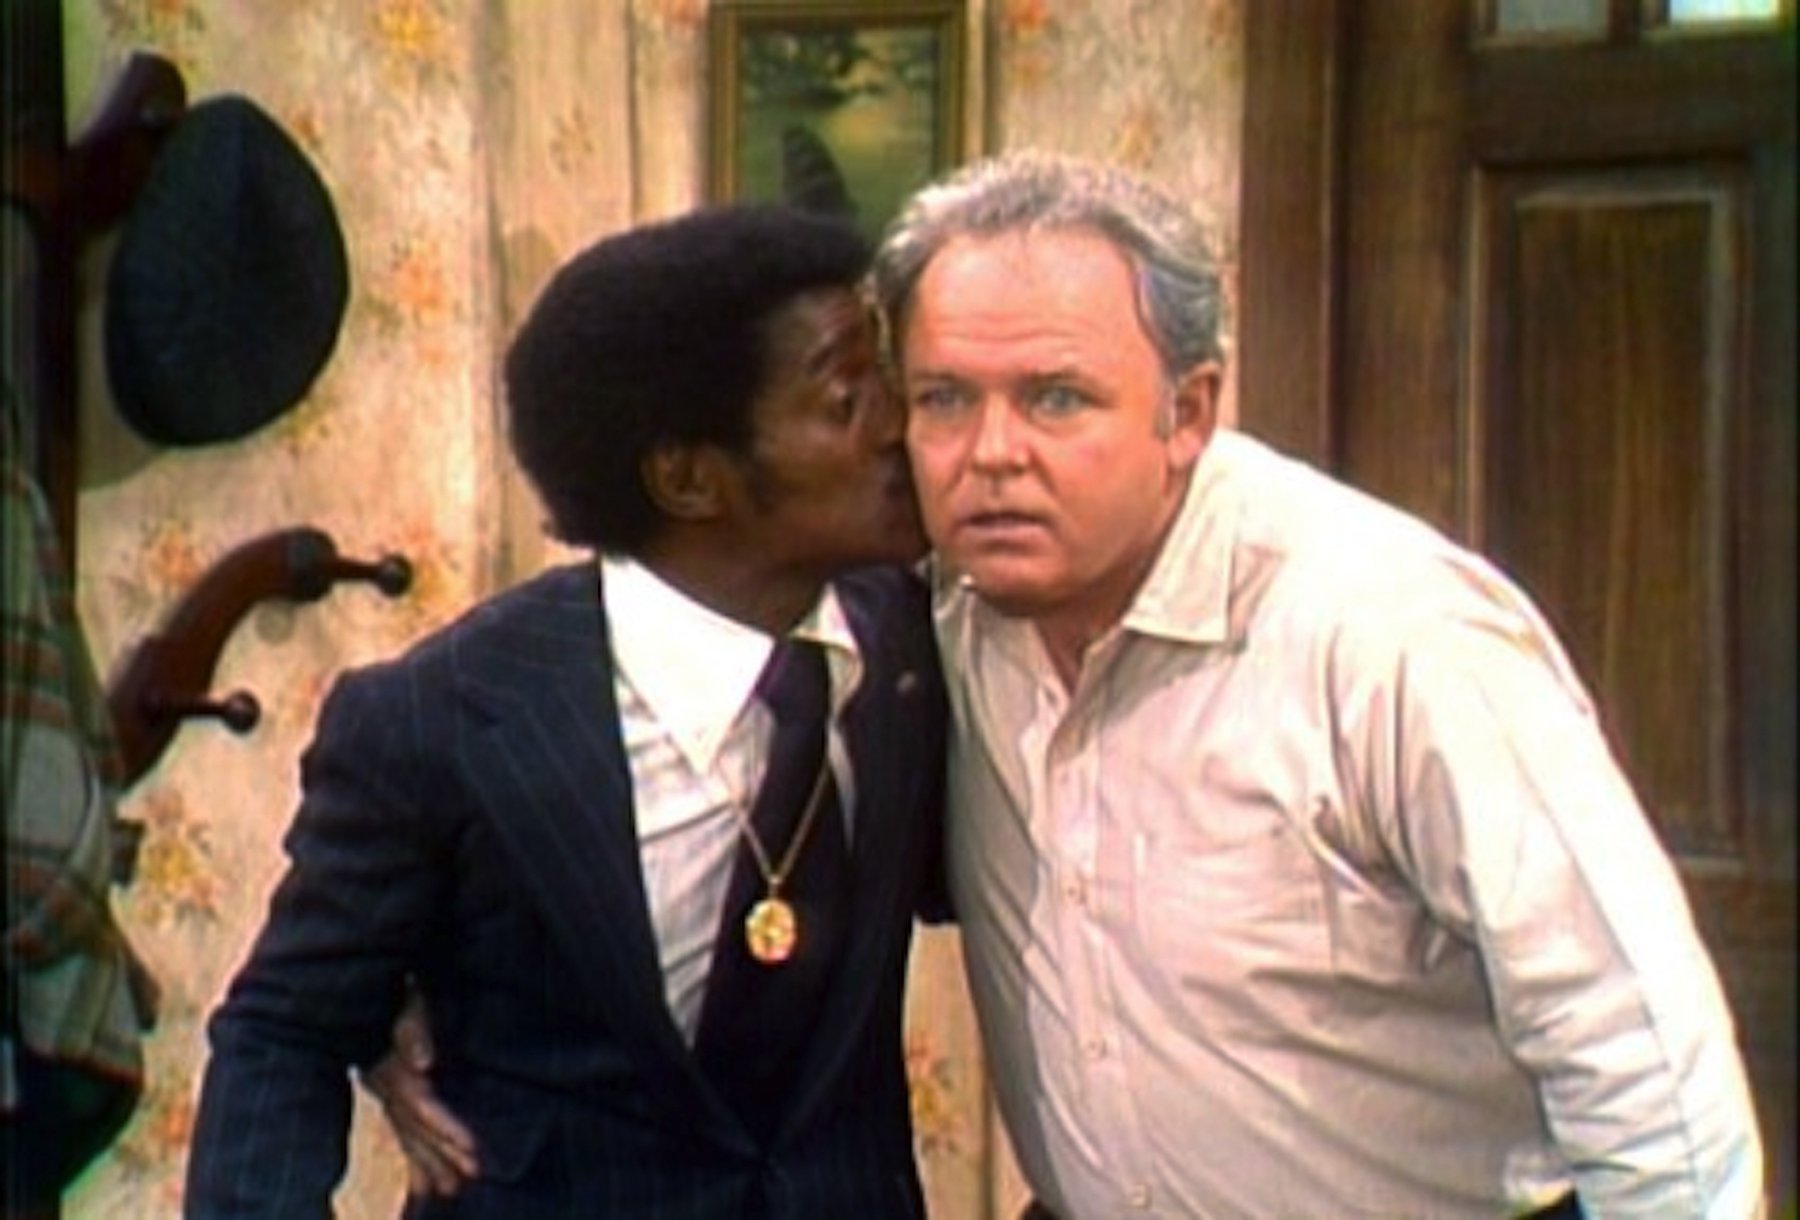 archie bunker forced people to look inside themselves and shape up